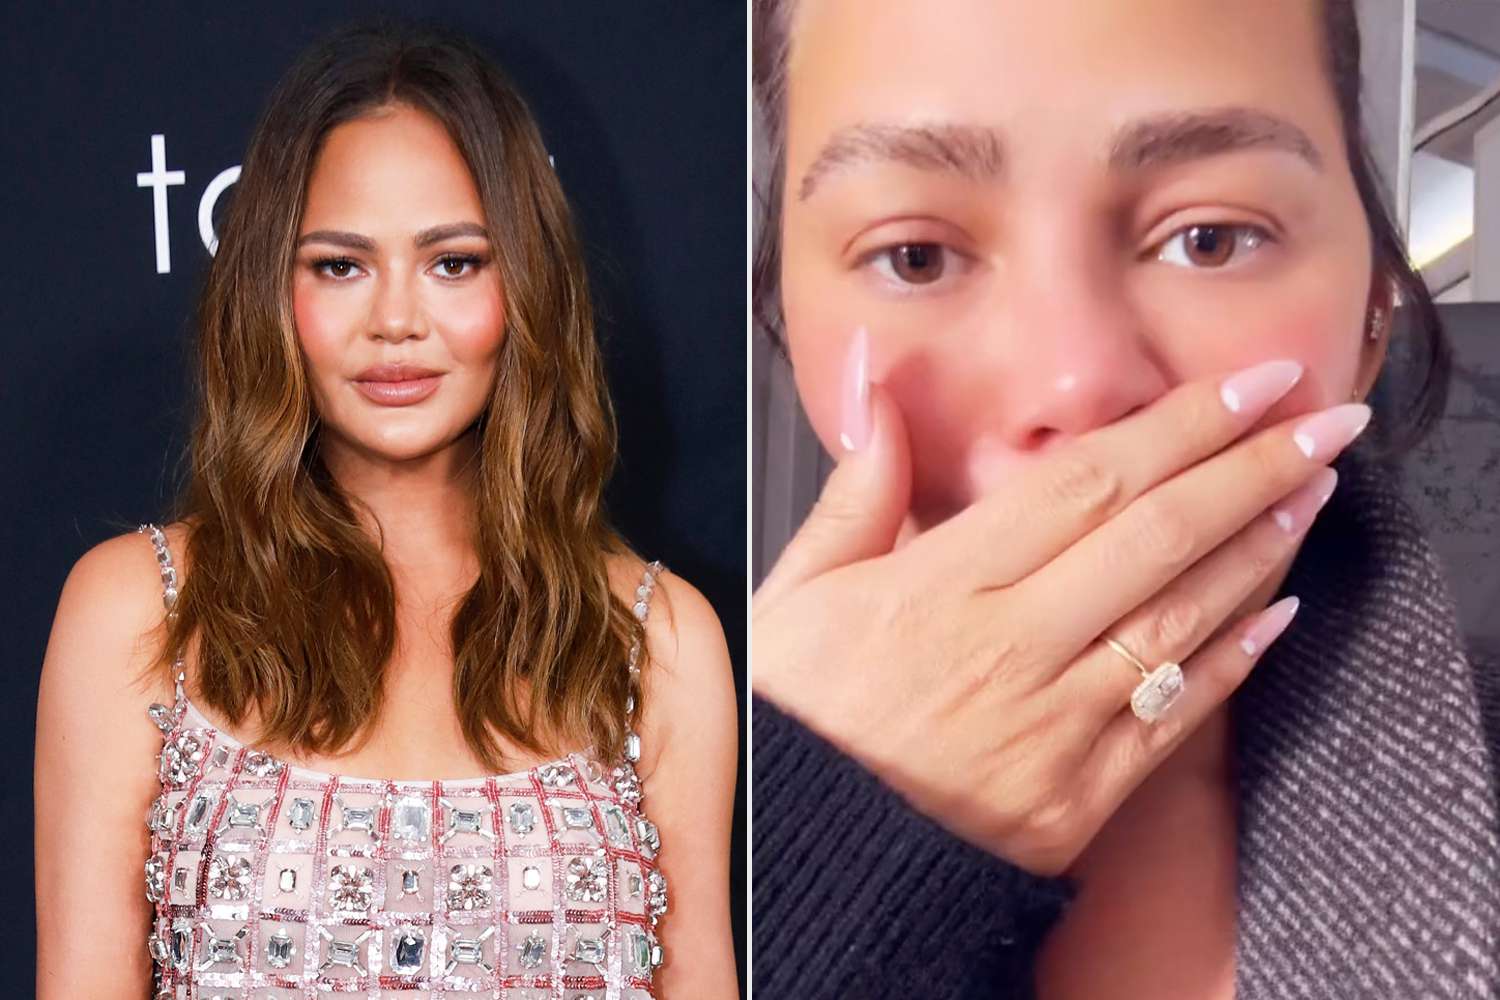 Chrissy Teigen Visibly Shaken After Flight's 'Erroneous Takeoff' Had Her ‘Bracing for Impact’: 'So Grateful'